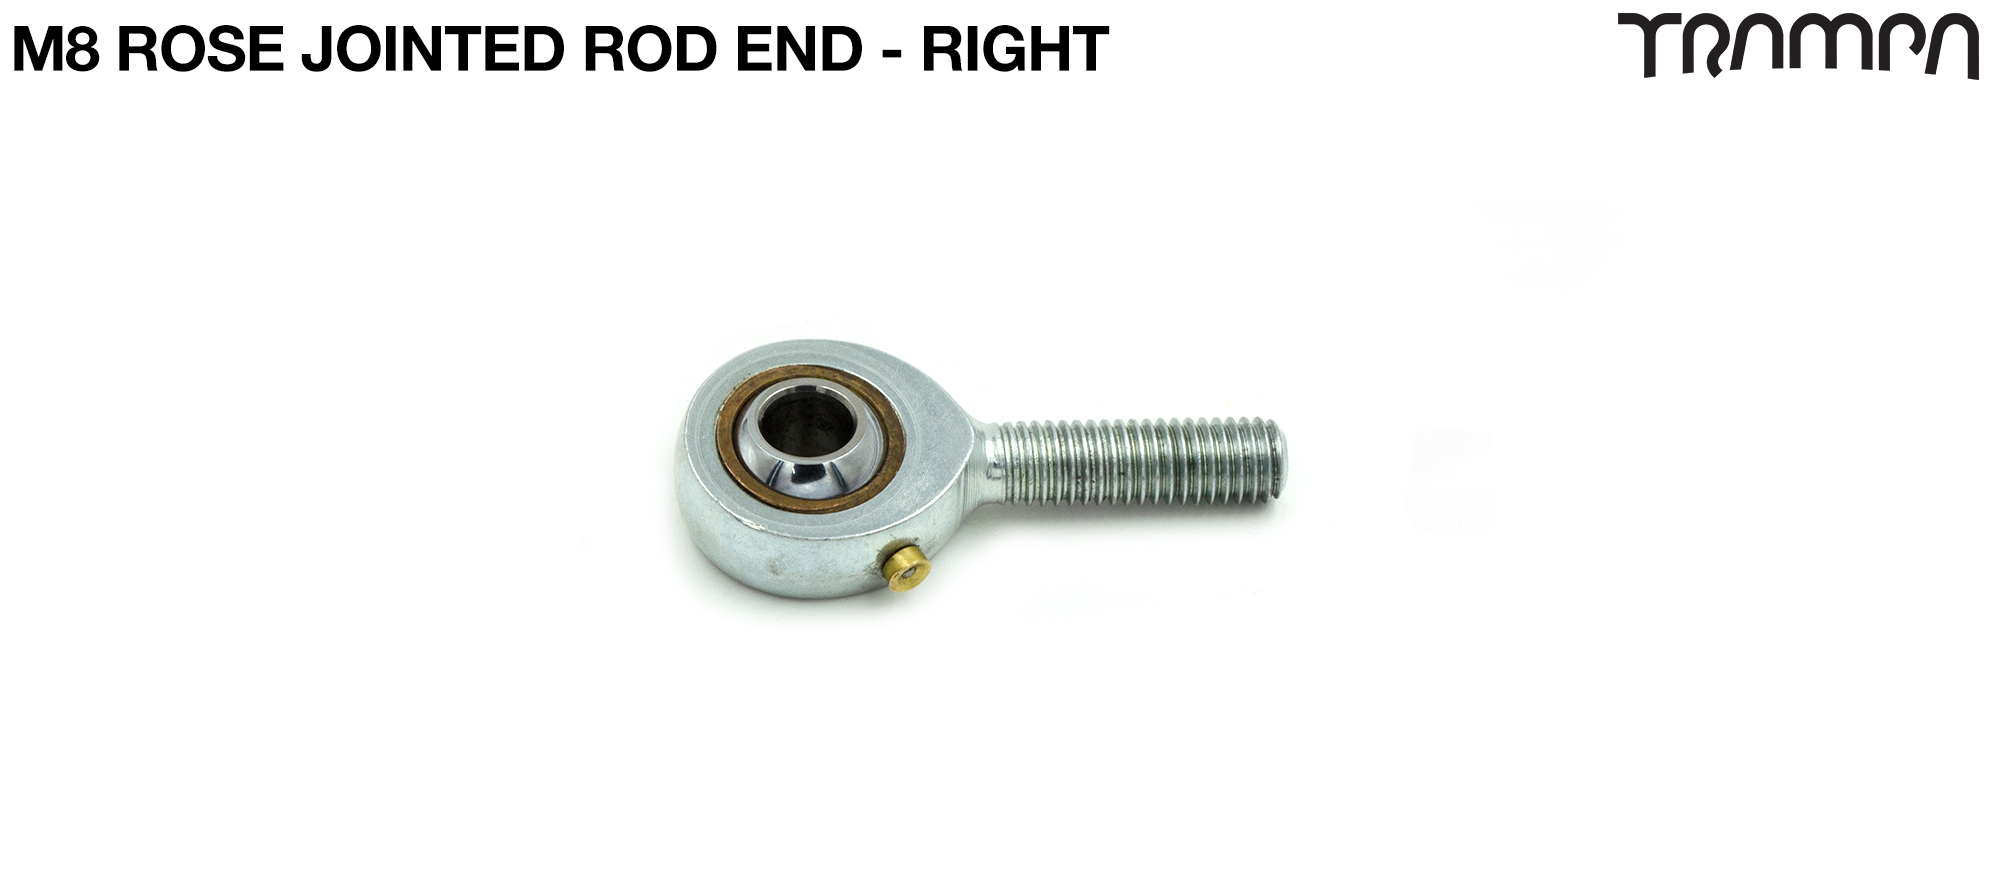 M8 Rose Jointed Rod End - RIGHT